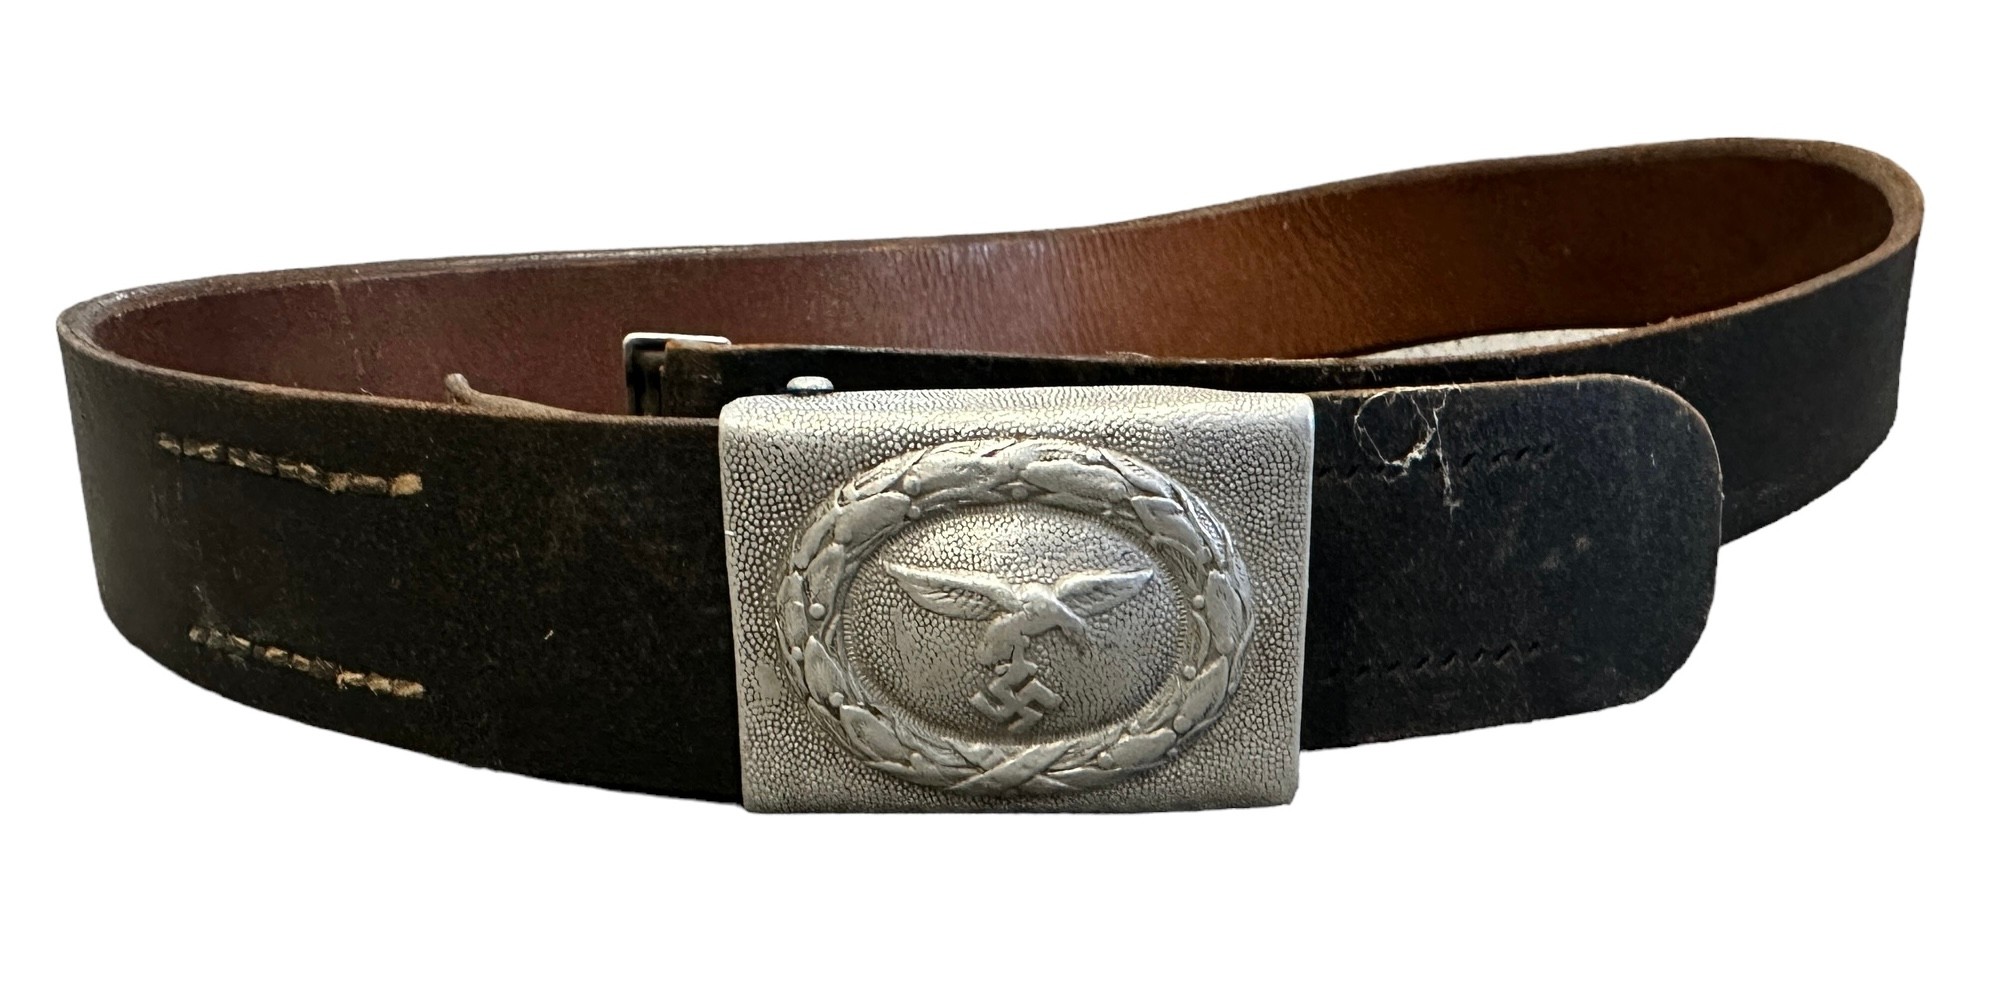 Third Reich, Second World War German Luftwaffe leather belt and buckle, the buckle depicting the